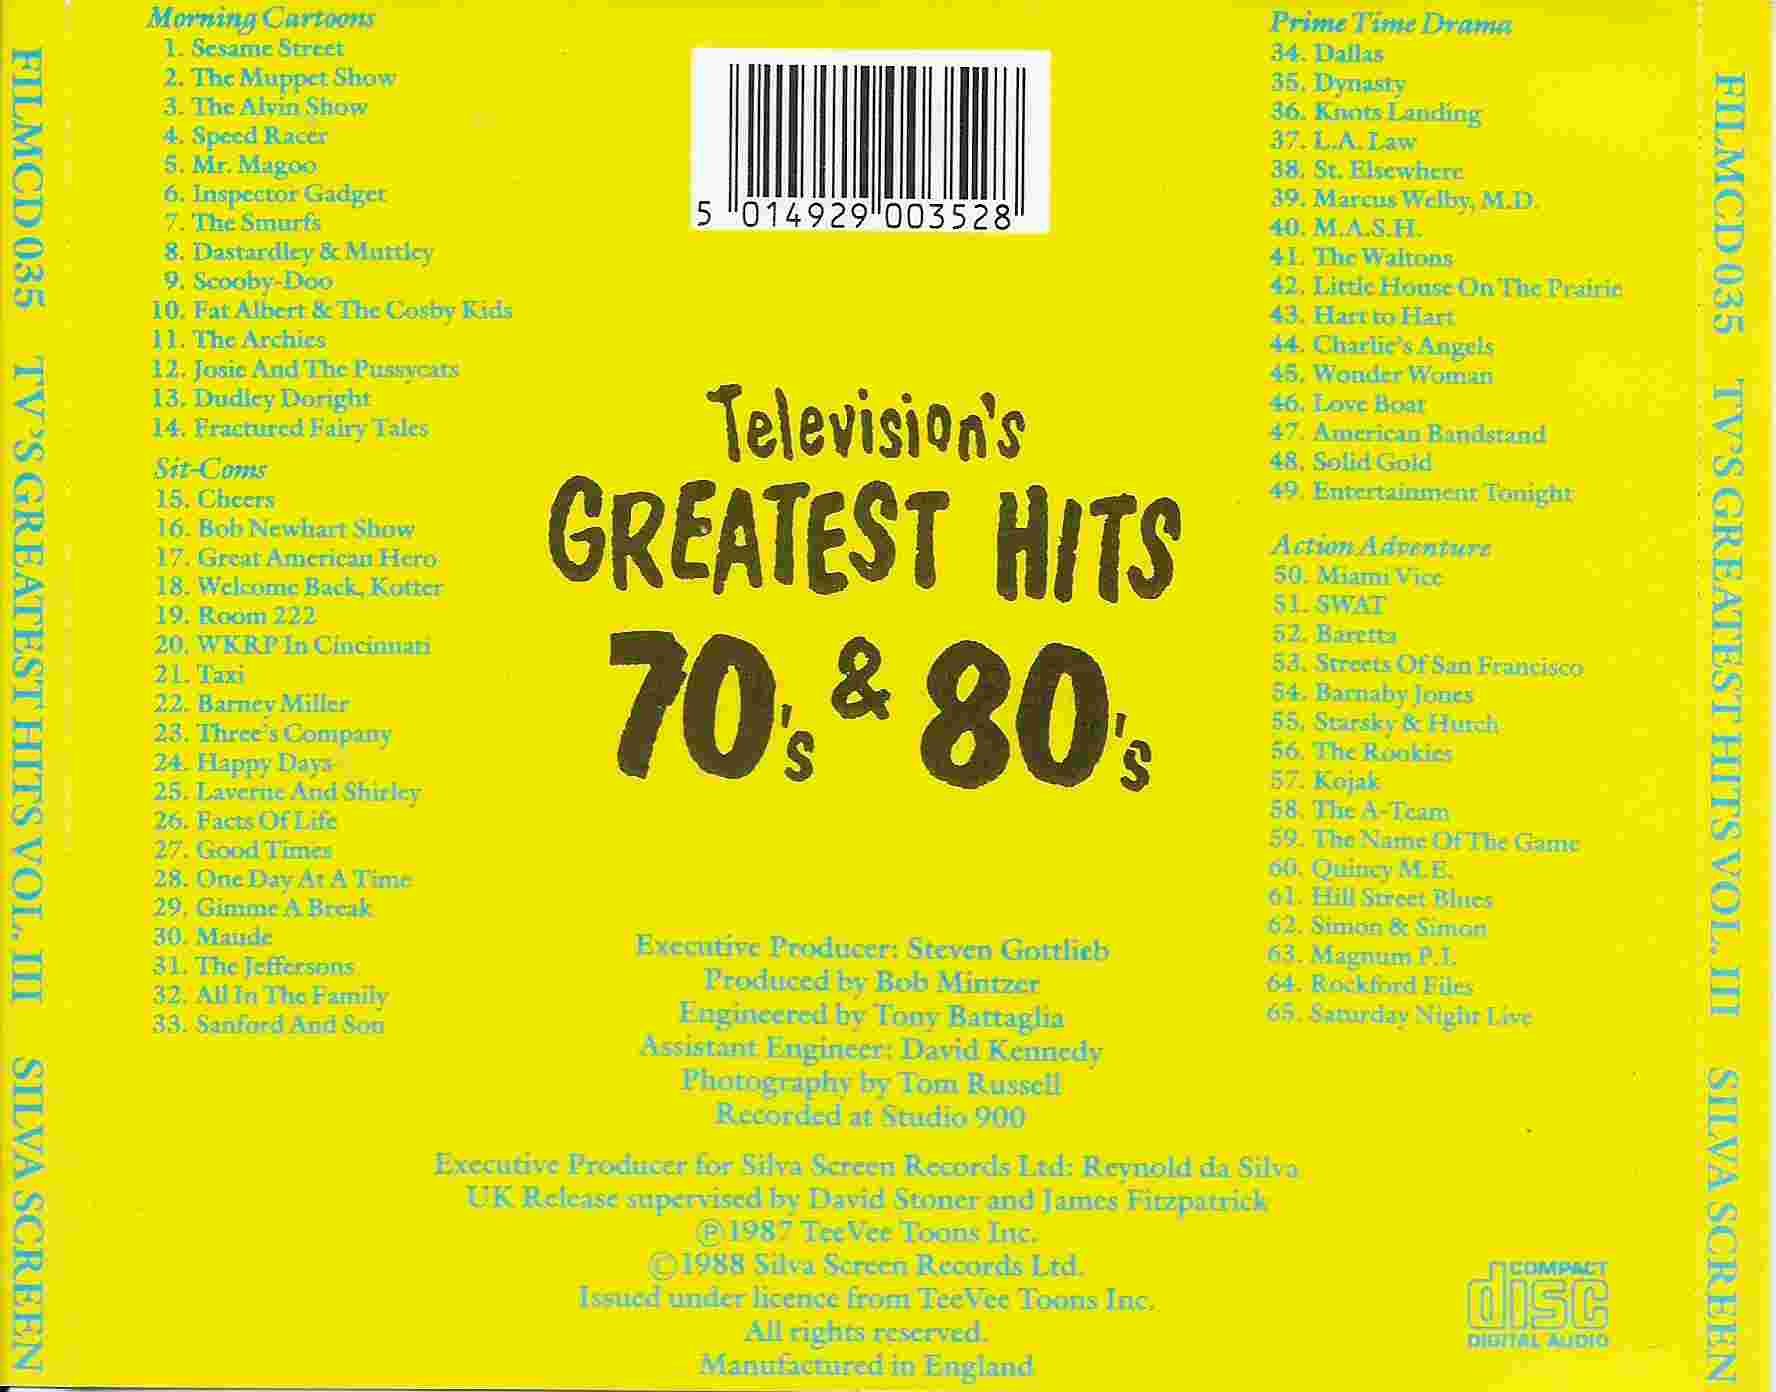 Picture of FILMCD 035 Television's greatest hits - Volume 3 by artist Various from ITV, Channel 4 and Channel 5 library